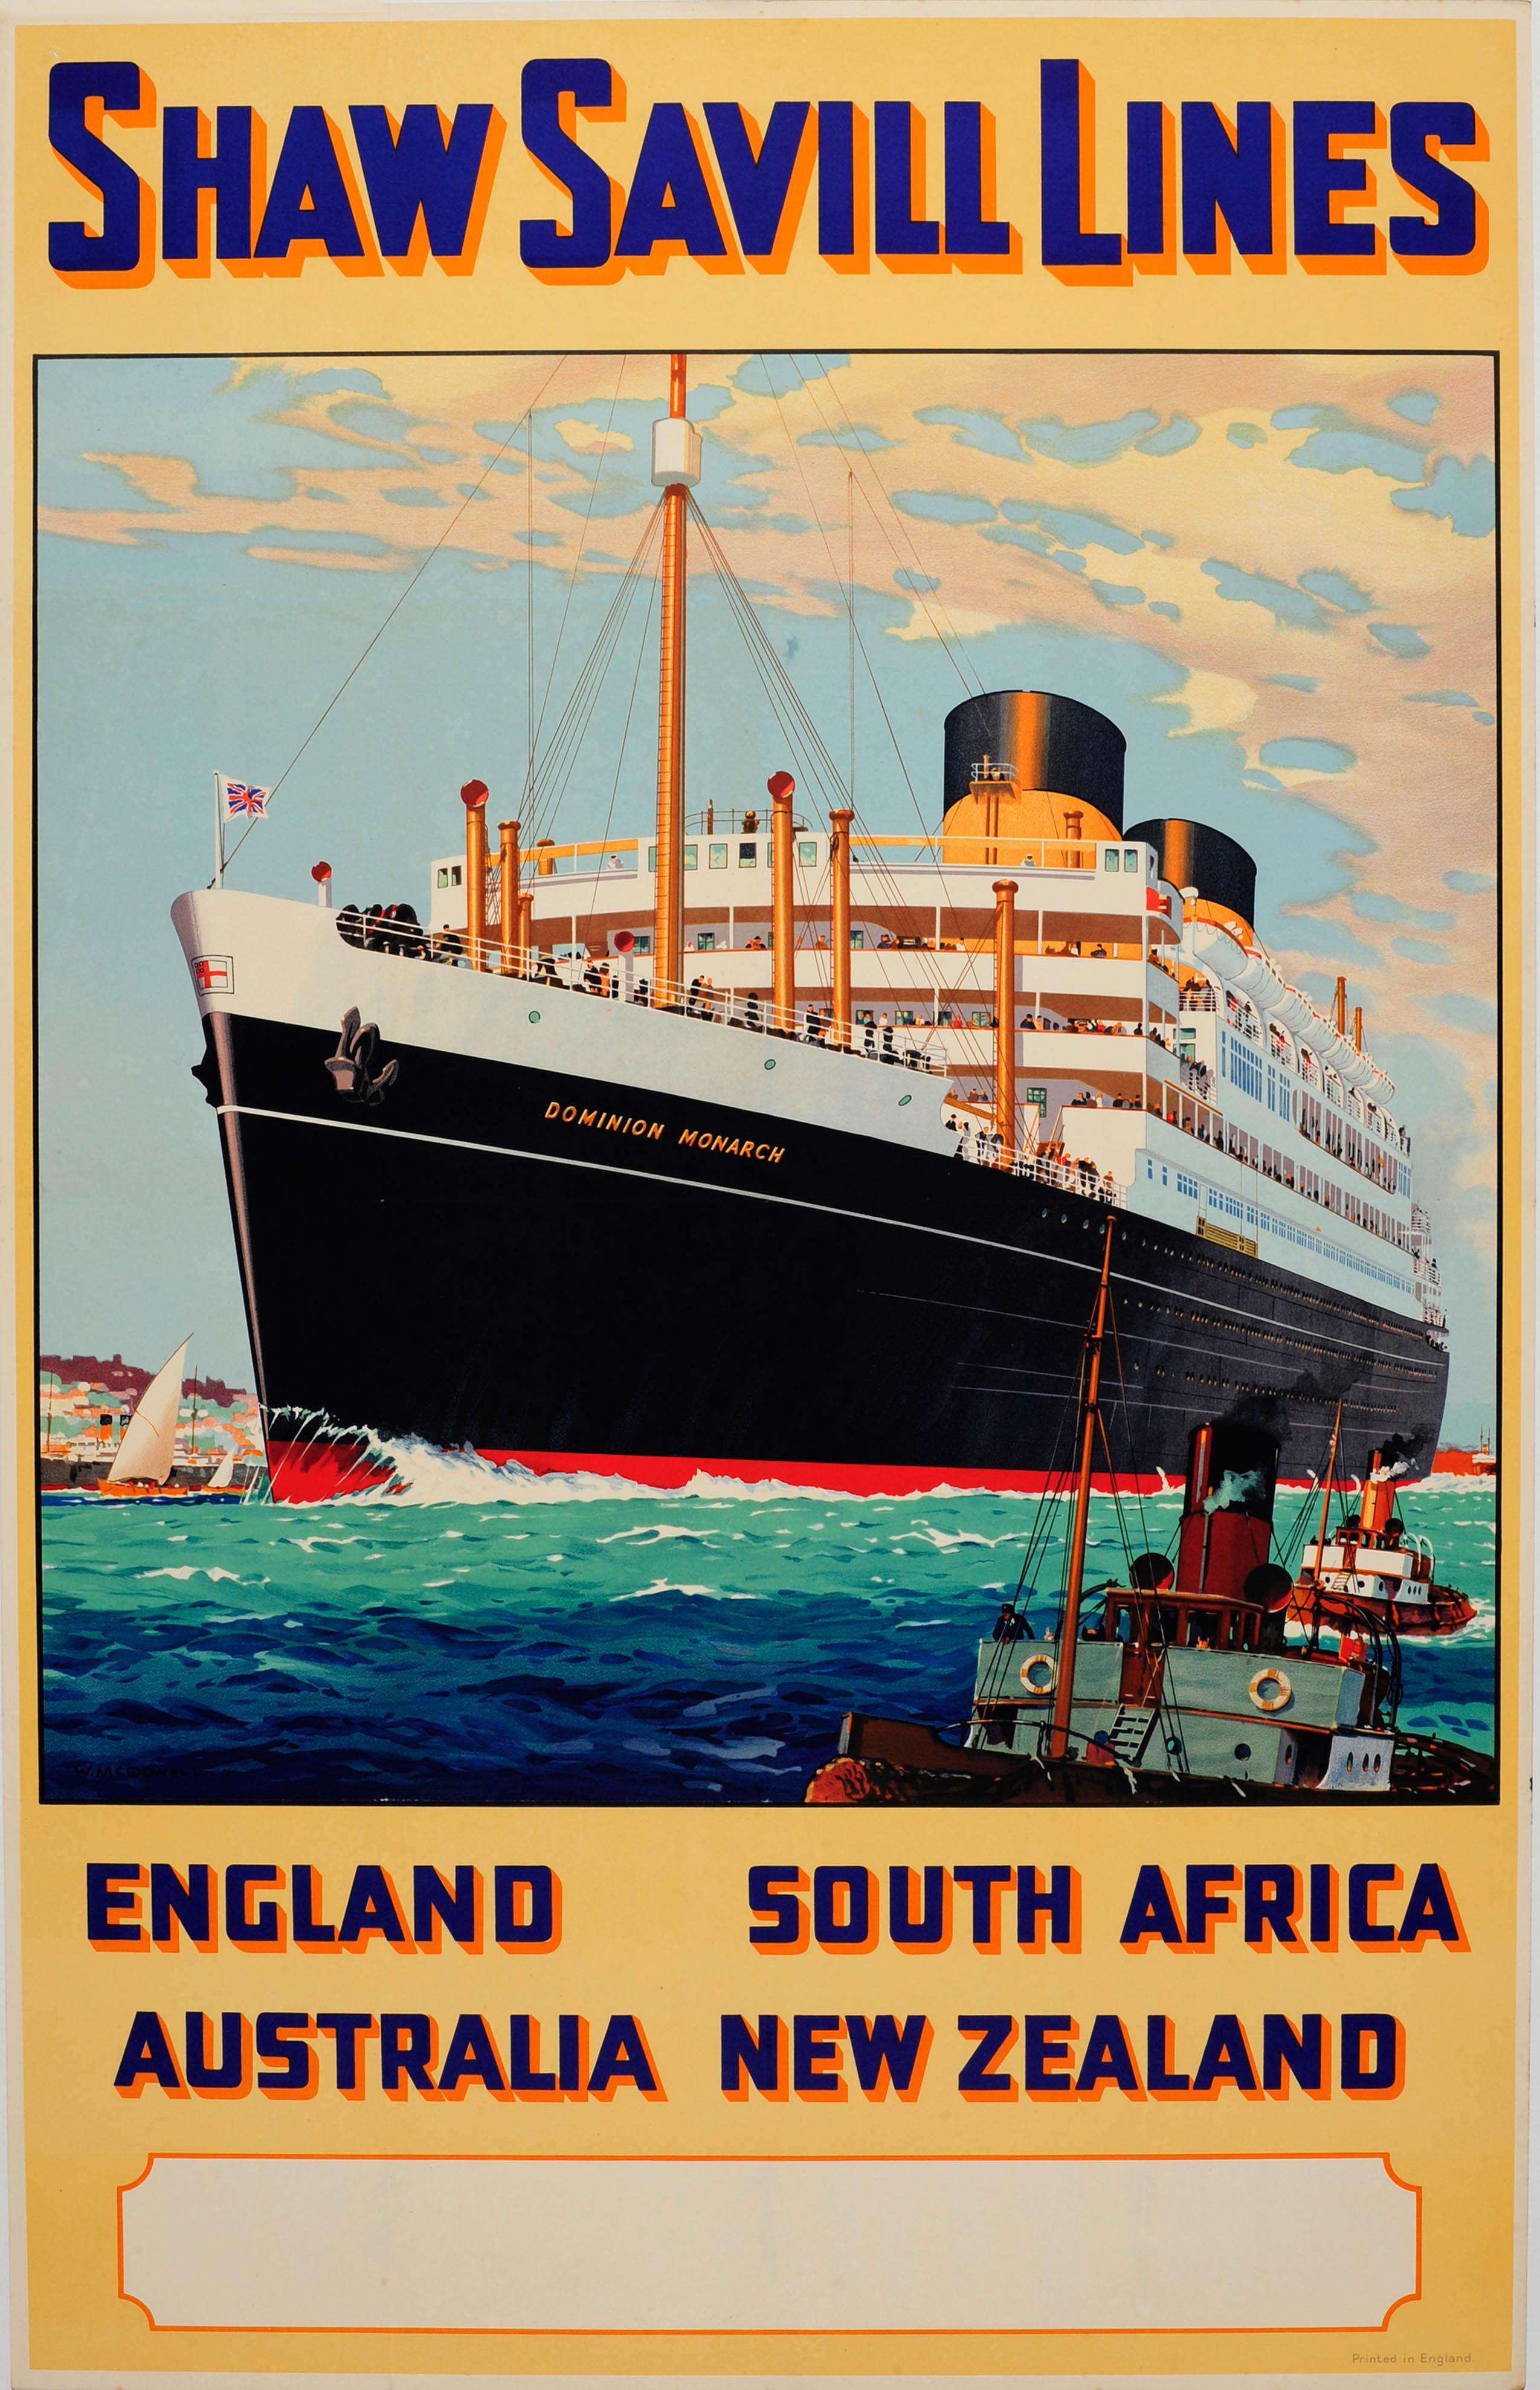 William McDowell Print - Original Vintage Shaw Savill Lines Cruise Liner Travel Poster Dominion Monarch